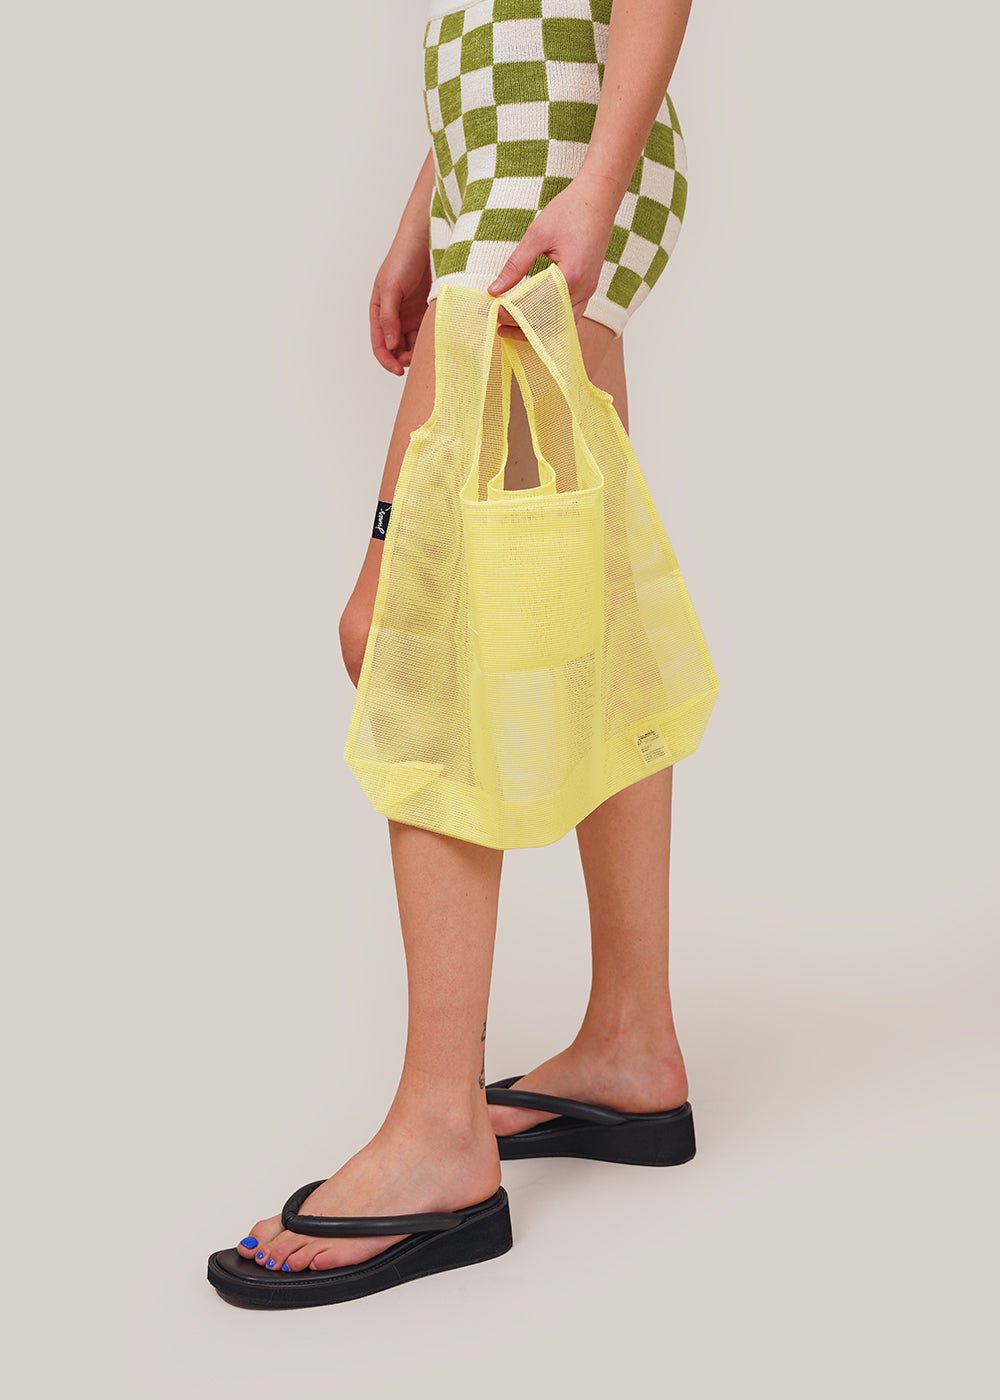 Junes Pale Yellow Hombre Bag - New Classics Studios Sustainable Ethical Fashion Canada